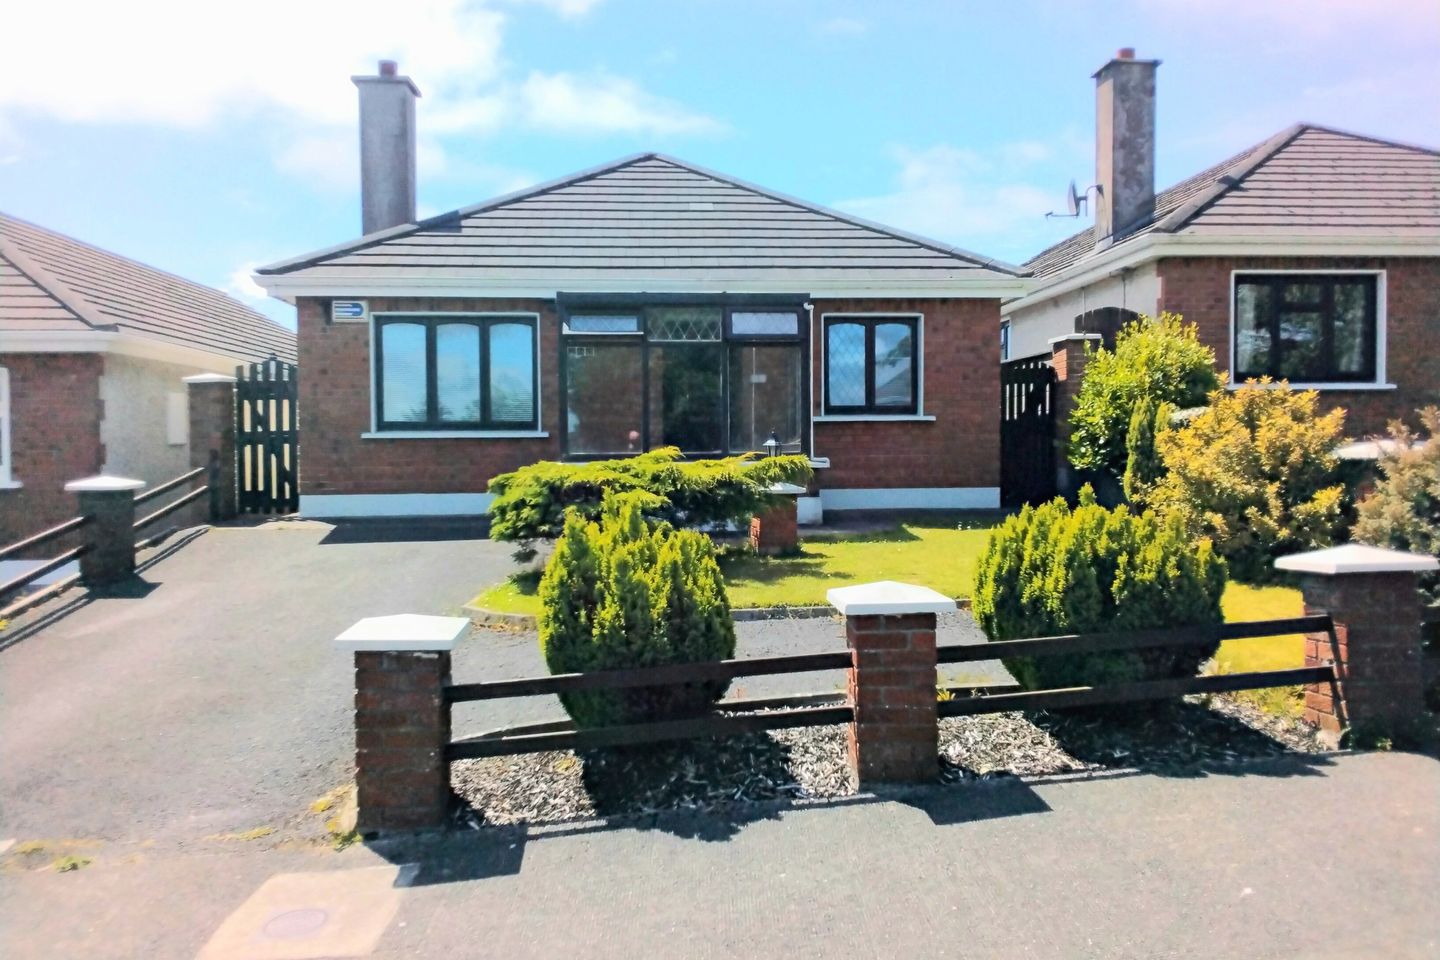 260 Laurel Park, Newcastle, Newcastle, Co. Galway